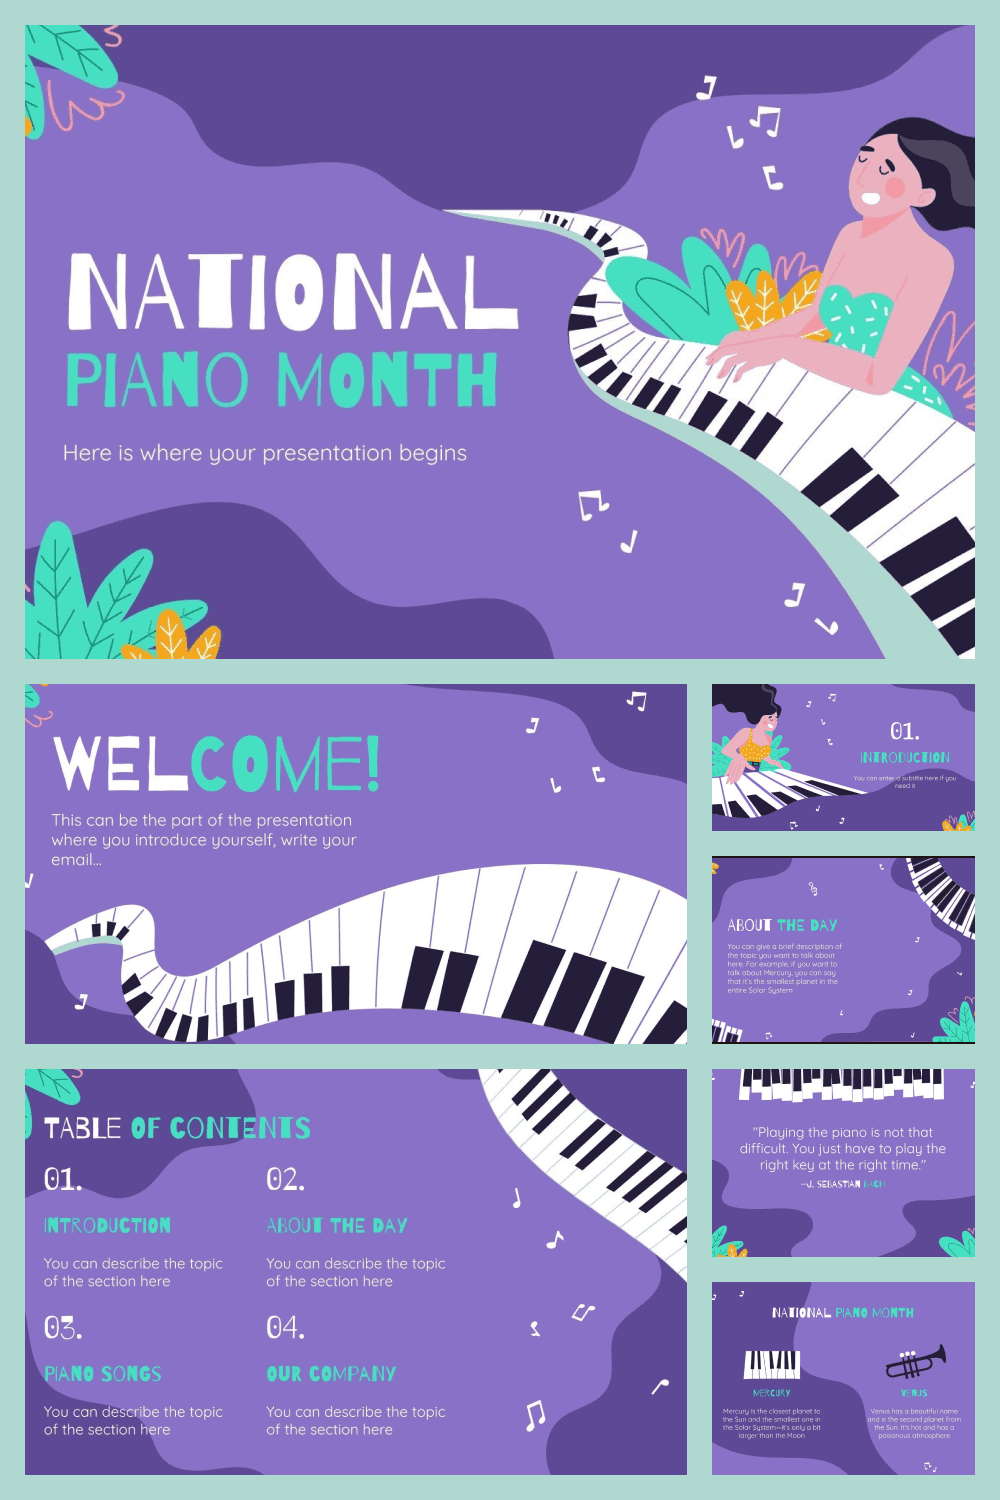 National piano month.